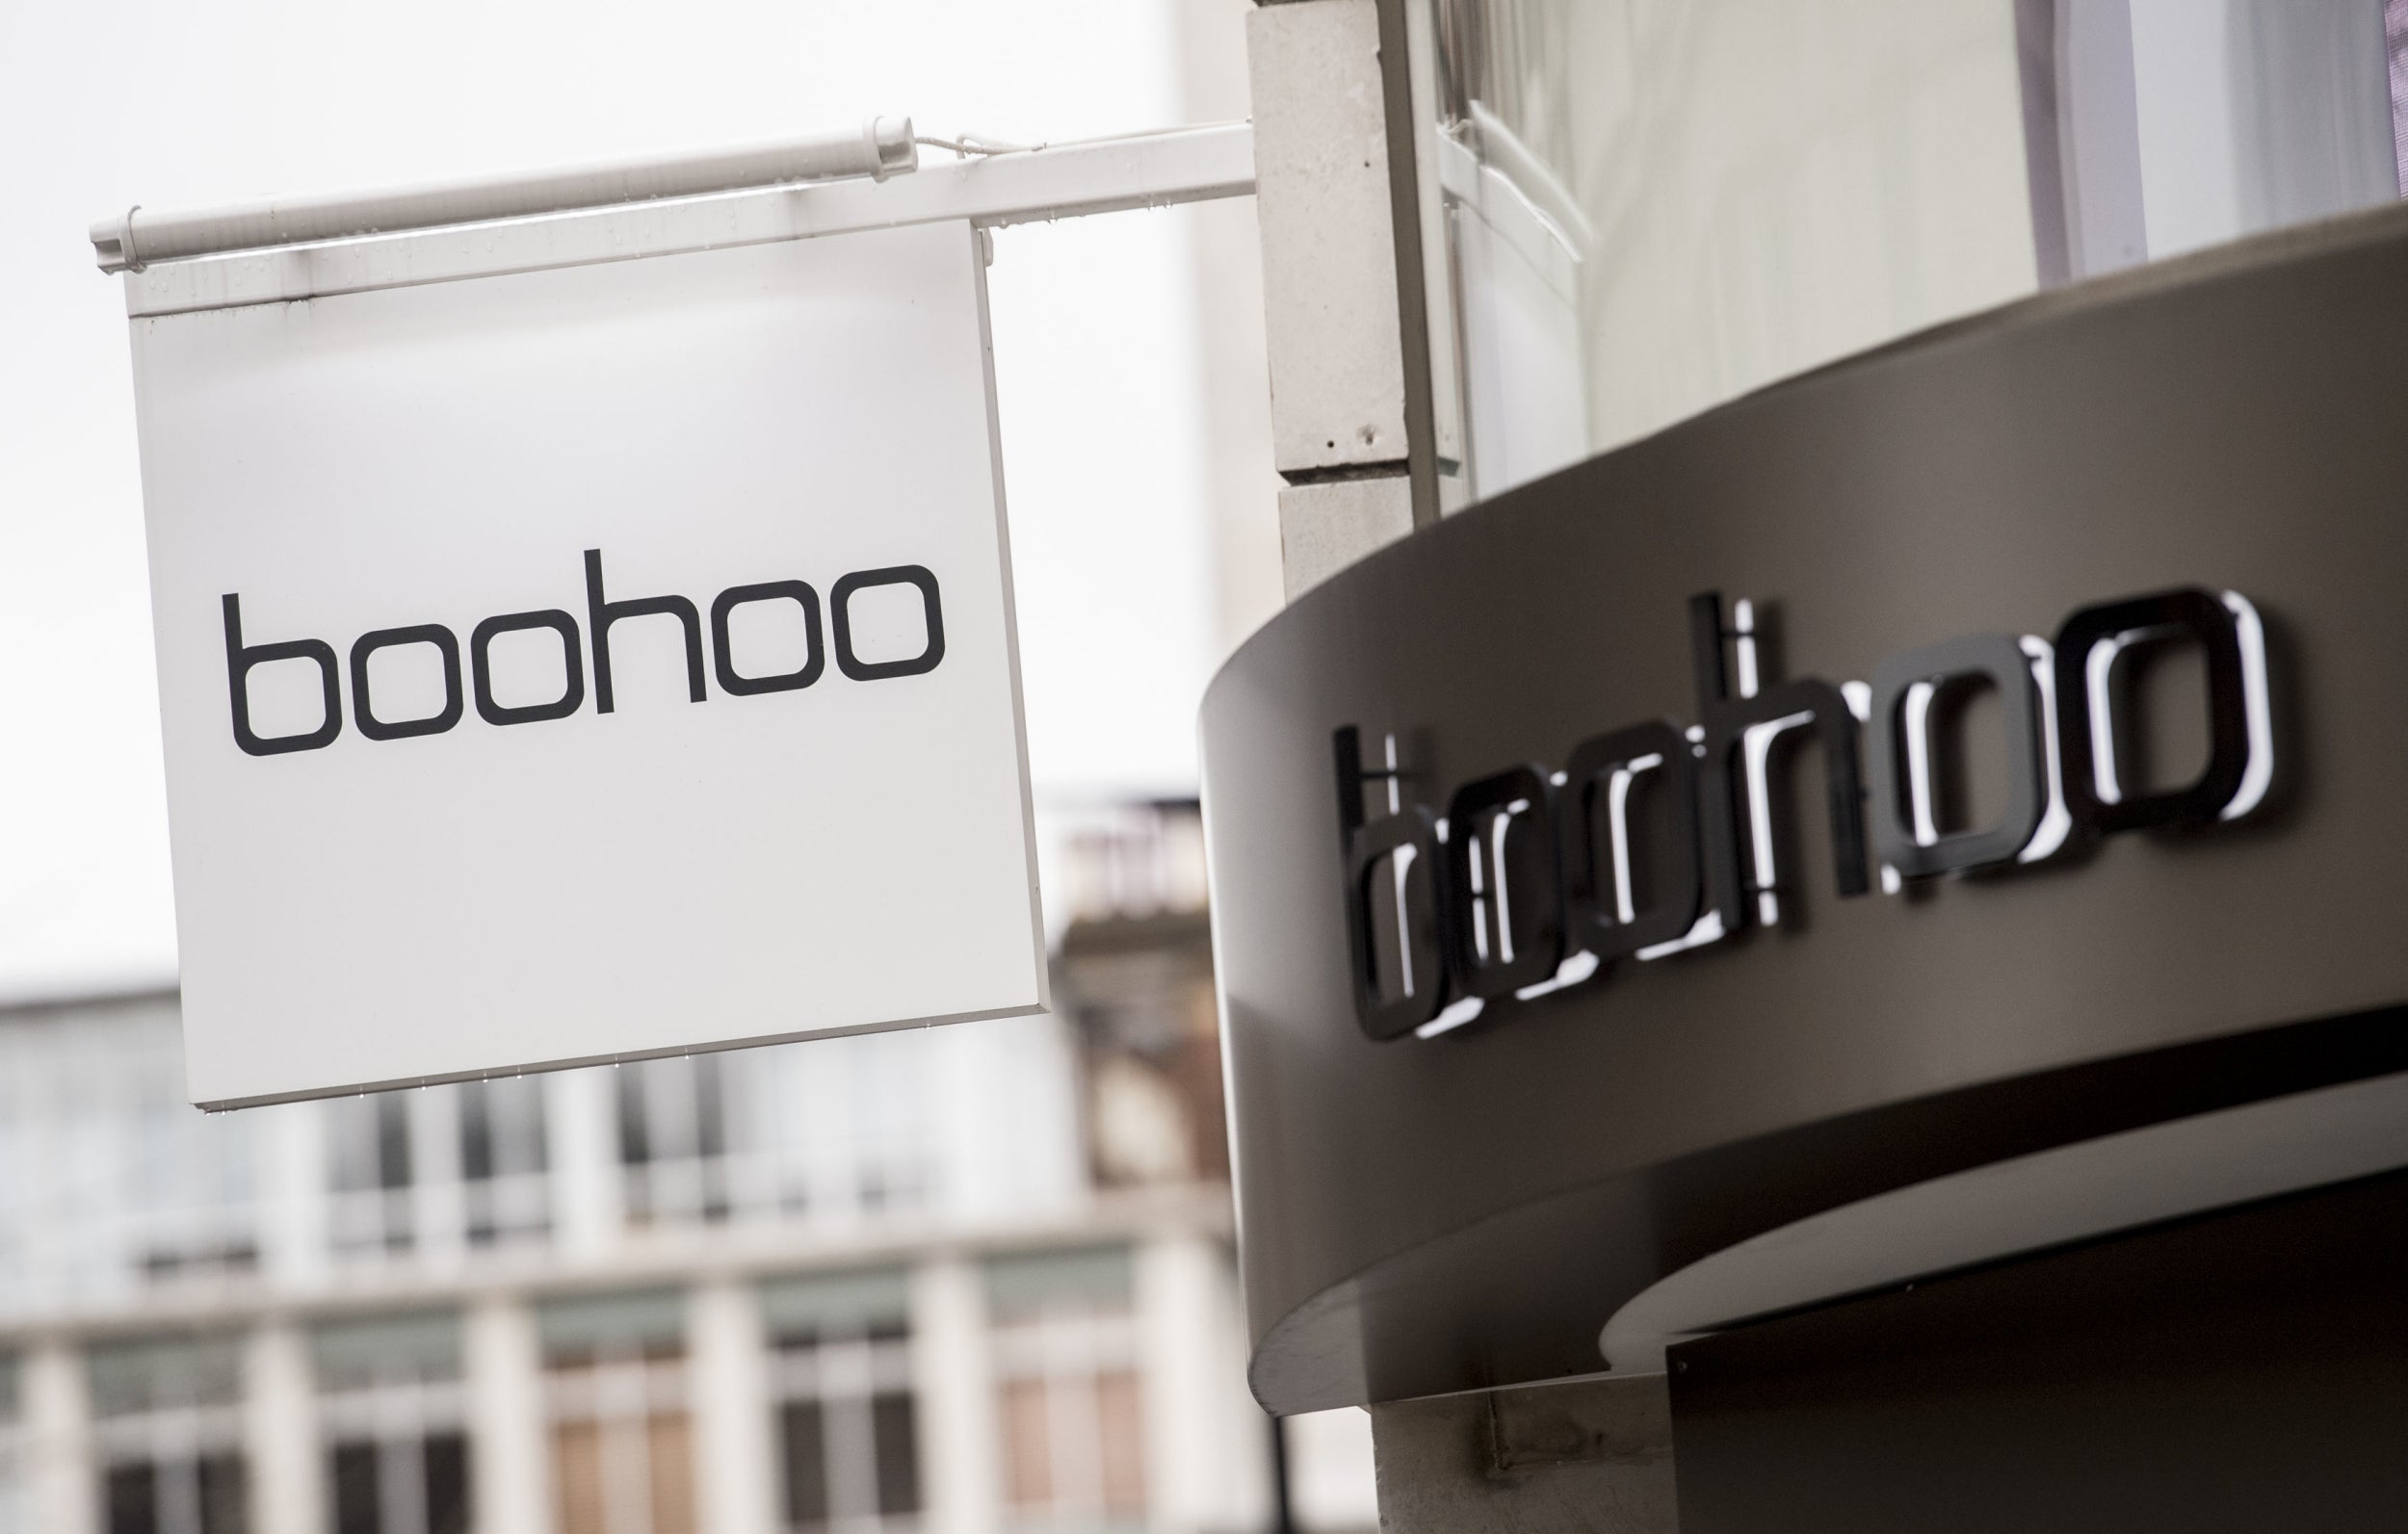 Scandal-hit retailer Boohoo drafted in retired judge Sir Brian Leveson to help it with ESG issues at the company